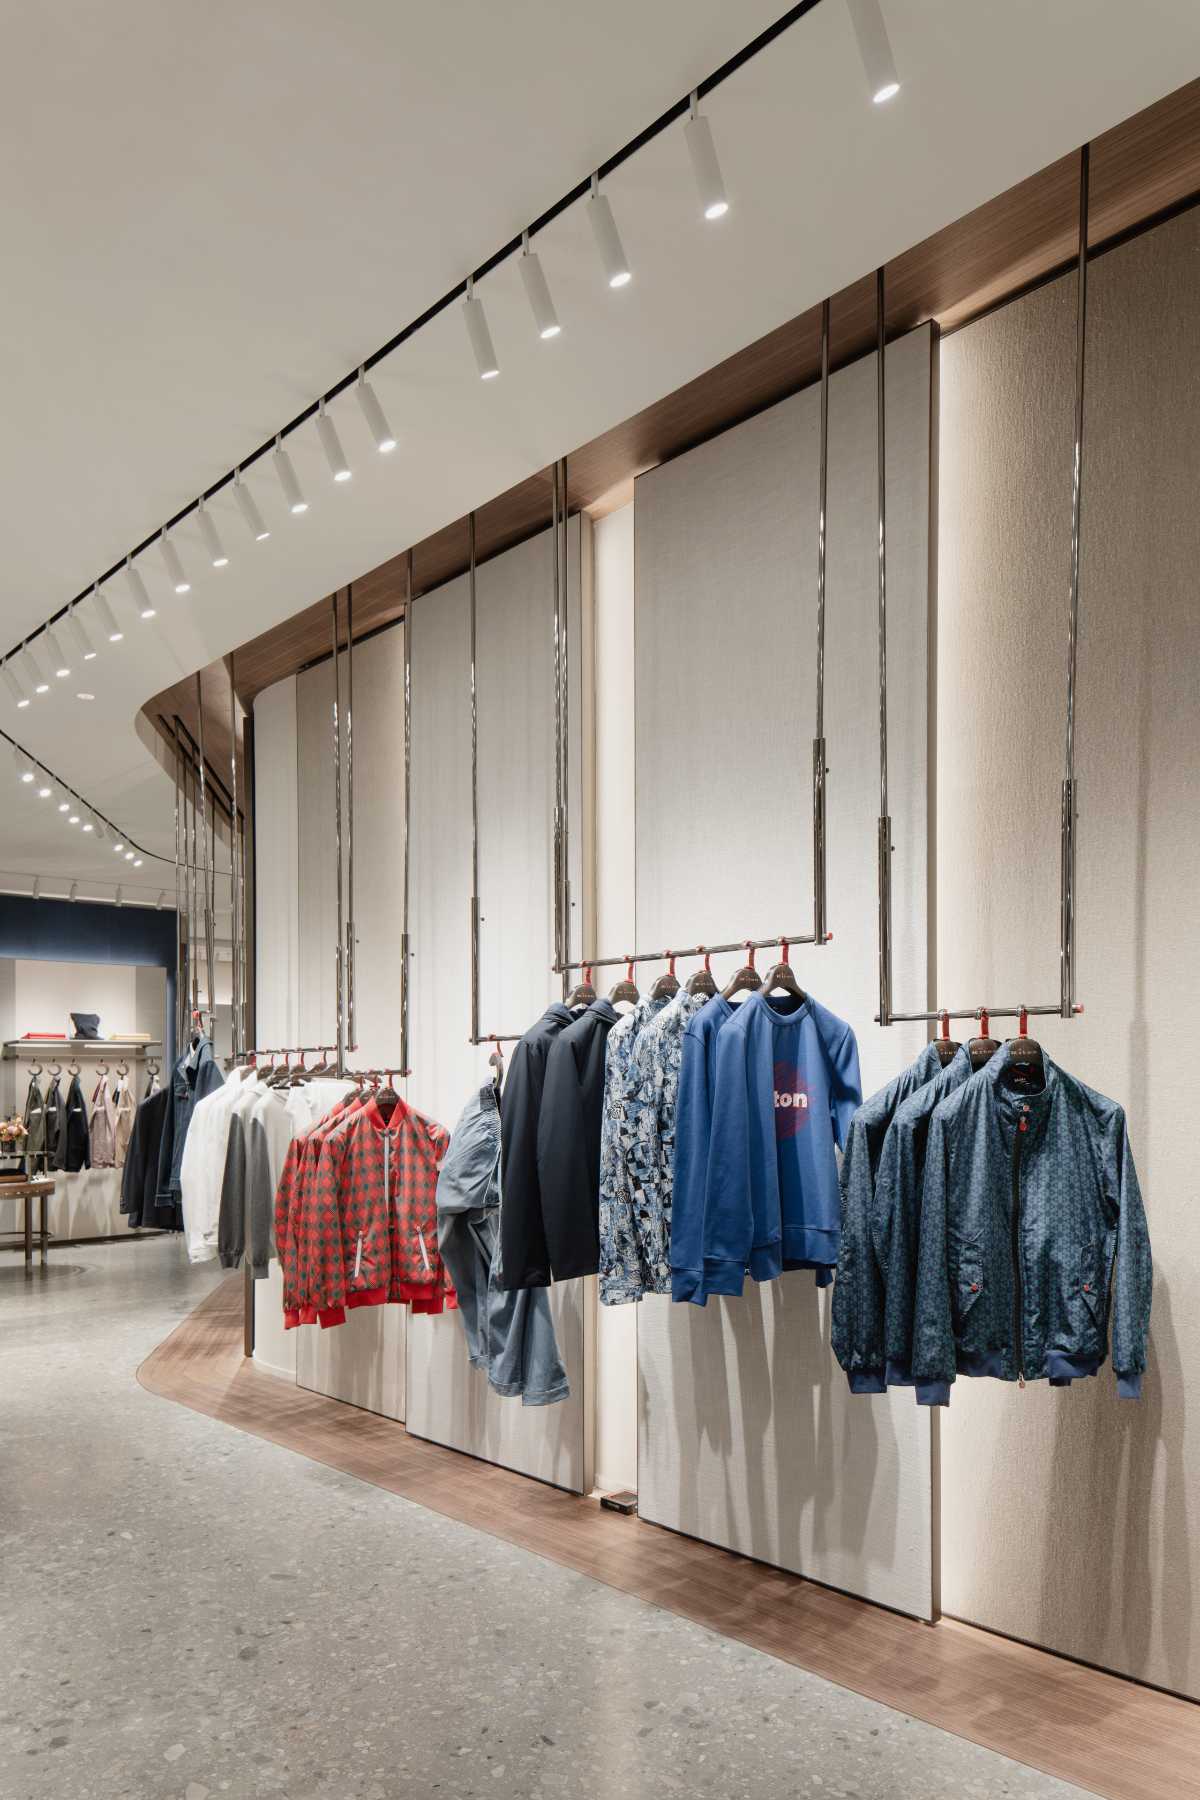 Kiton Opened Its New Flagship Store At Shanghai's Citic Plaza